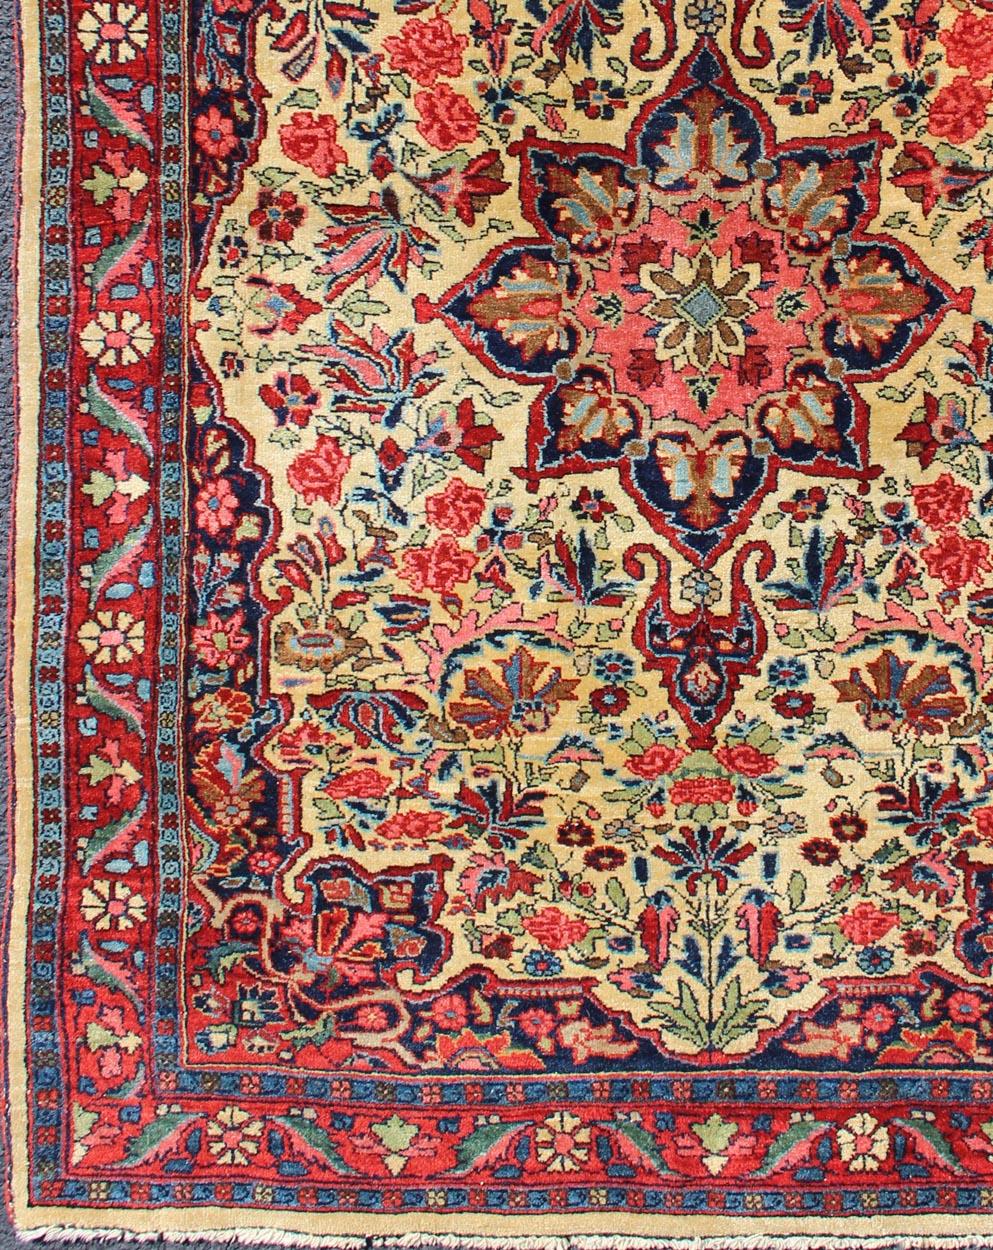 Antique hand-knotted Persian Bidjar, rug E-0910, country of origin / type: Persian / Tabriz, circa early-20th century.

This great condition and colorful antique Bidjar is characterized by very fine and luxurious wool. The colors include navy